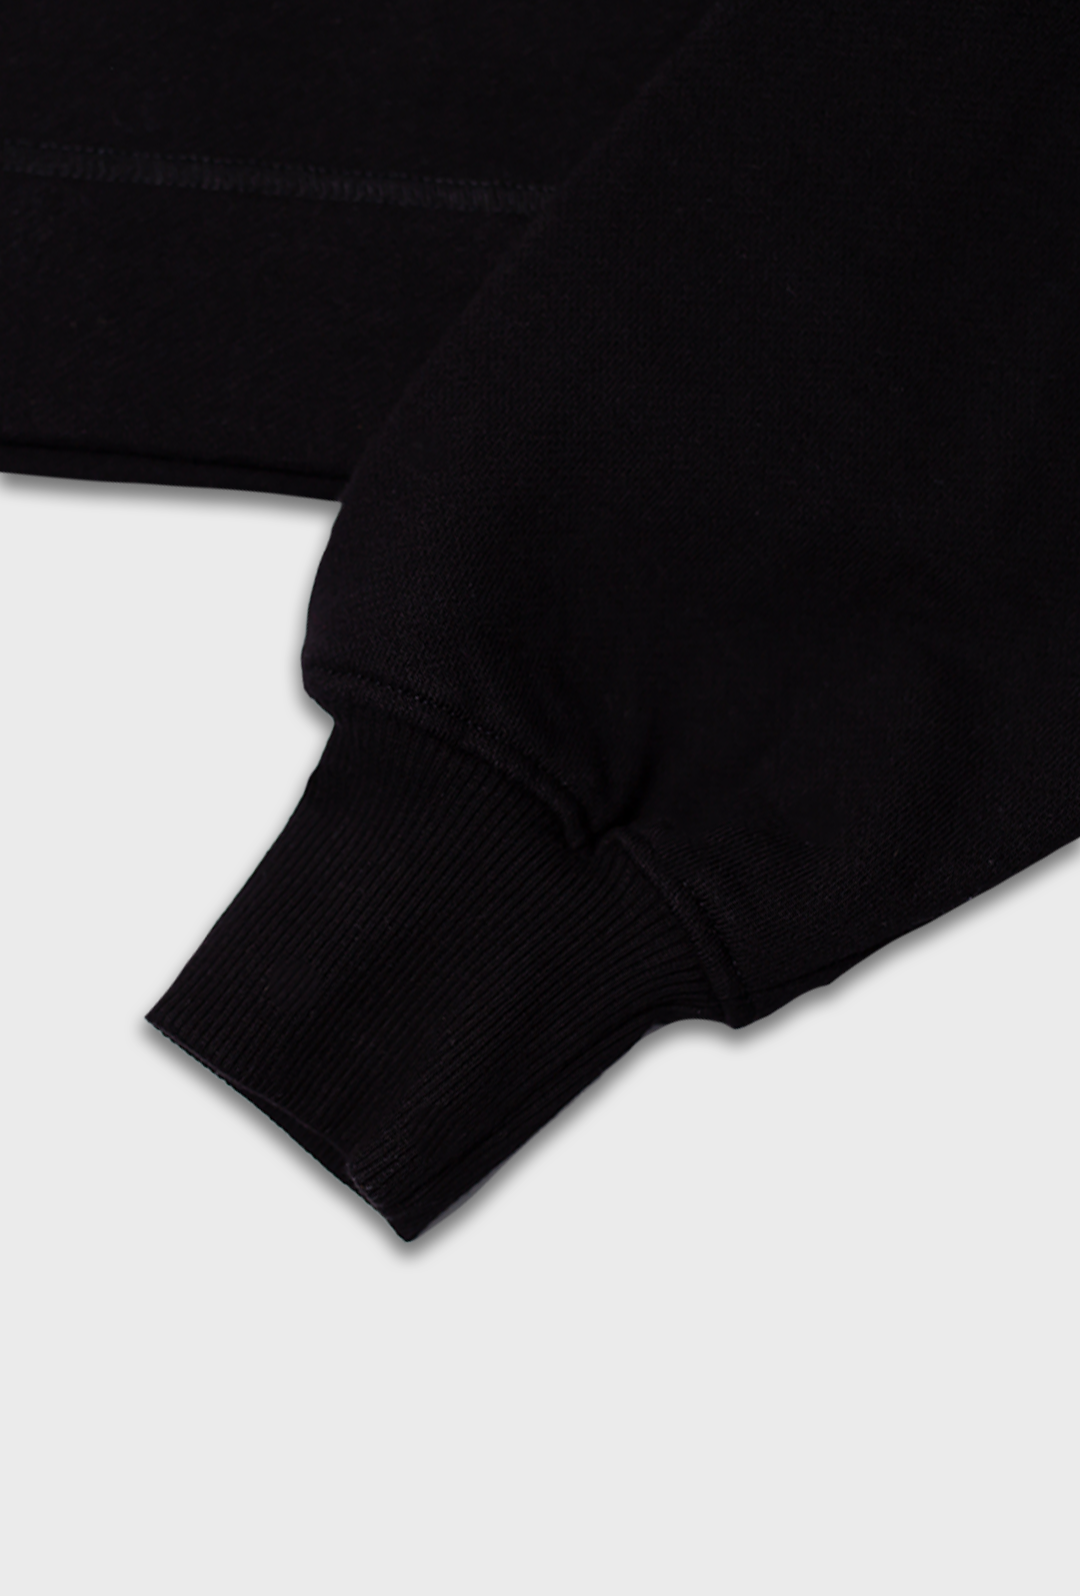 roller clothing cropped midnight black hoodie sleeve french terry fabric